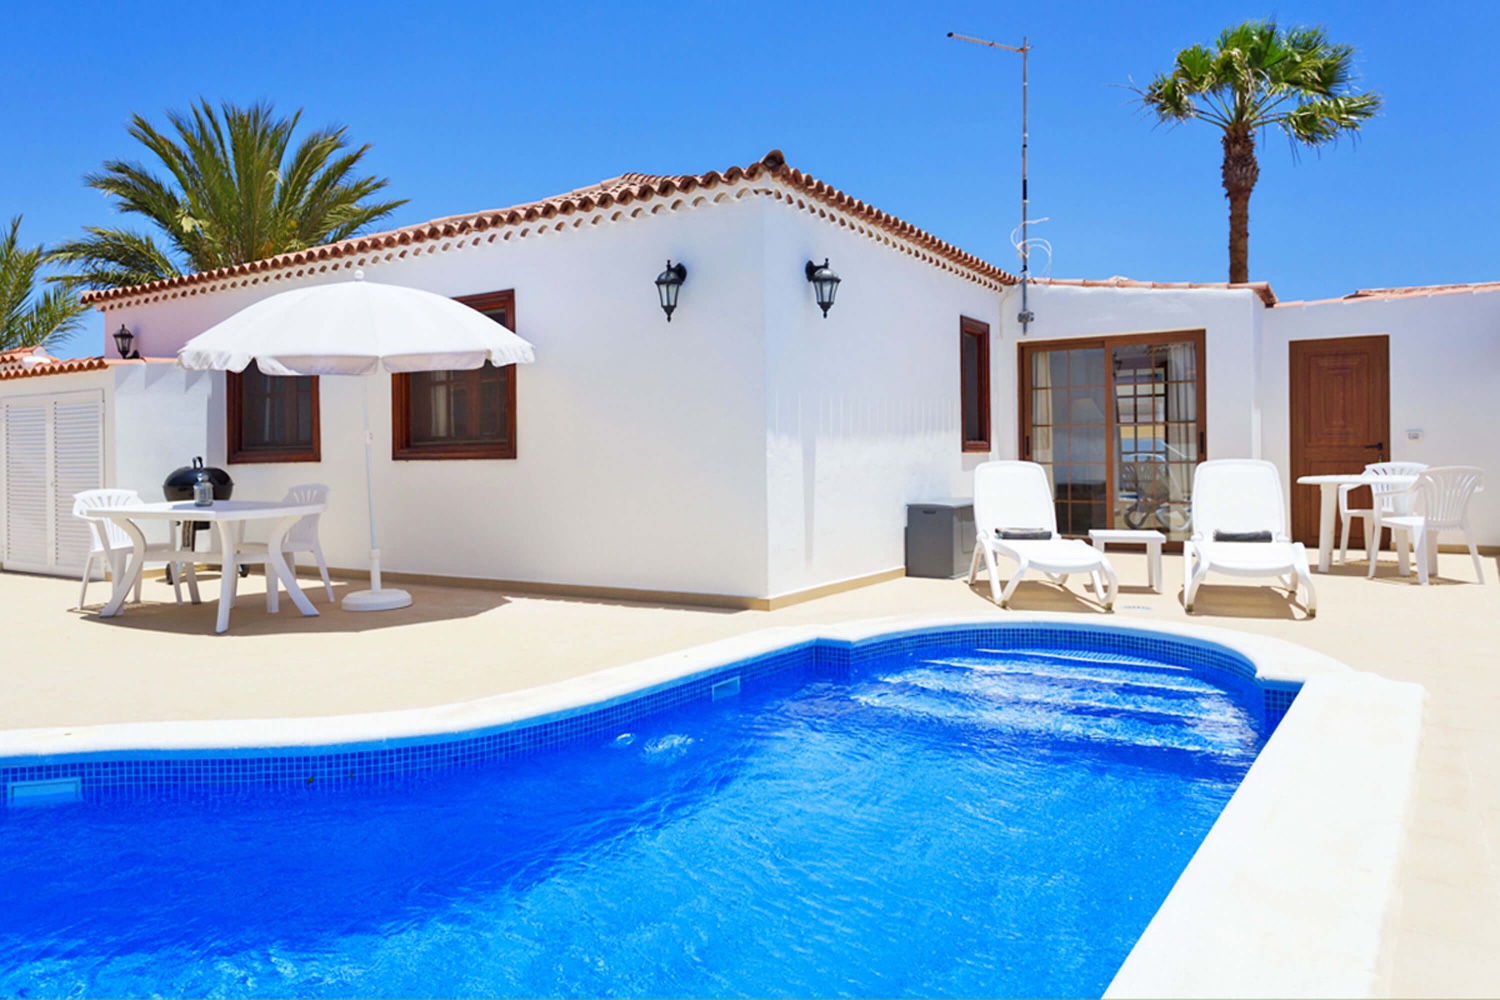 Casa Amarilla 2 is located on the golf course 